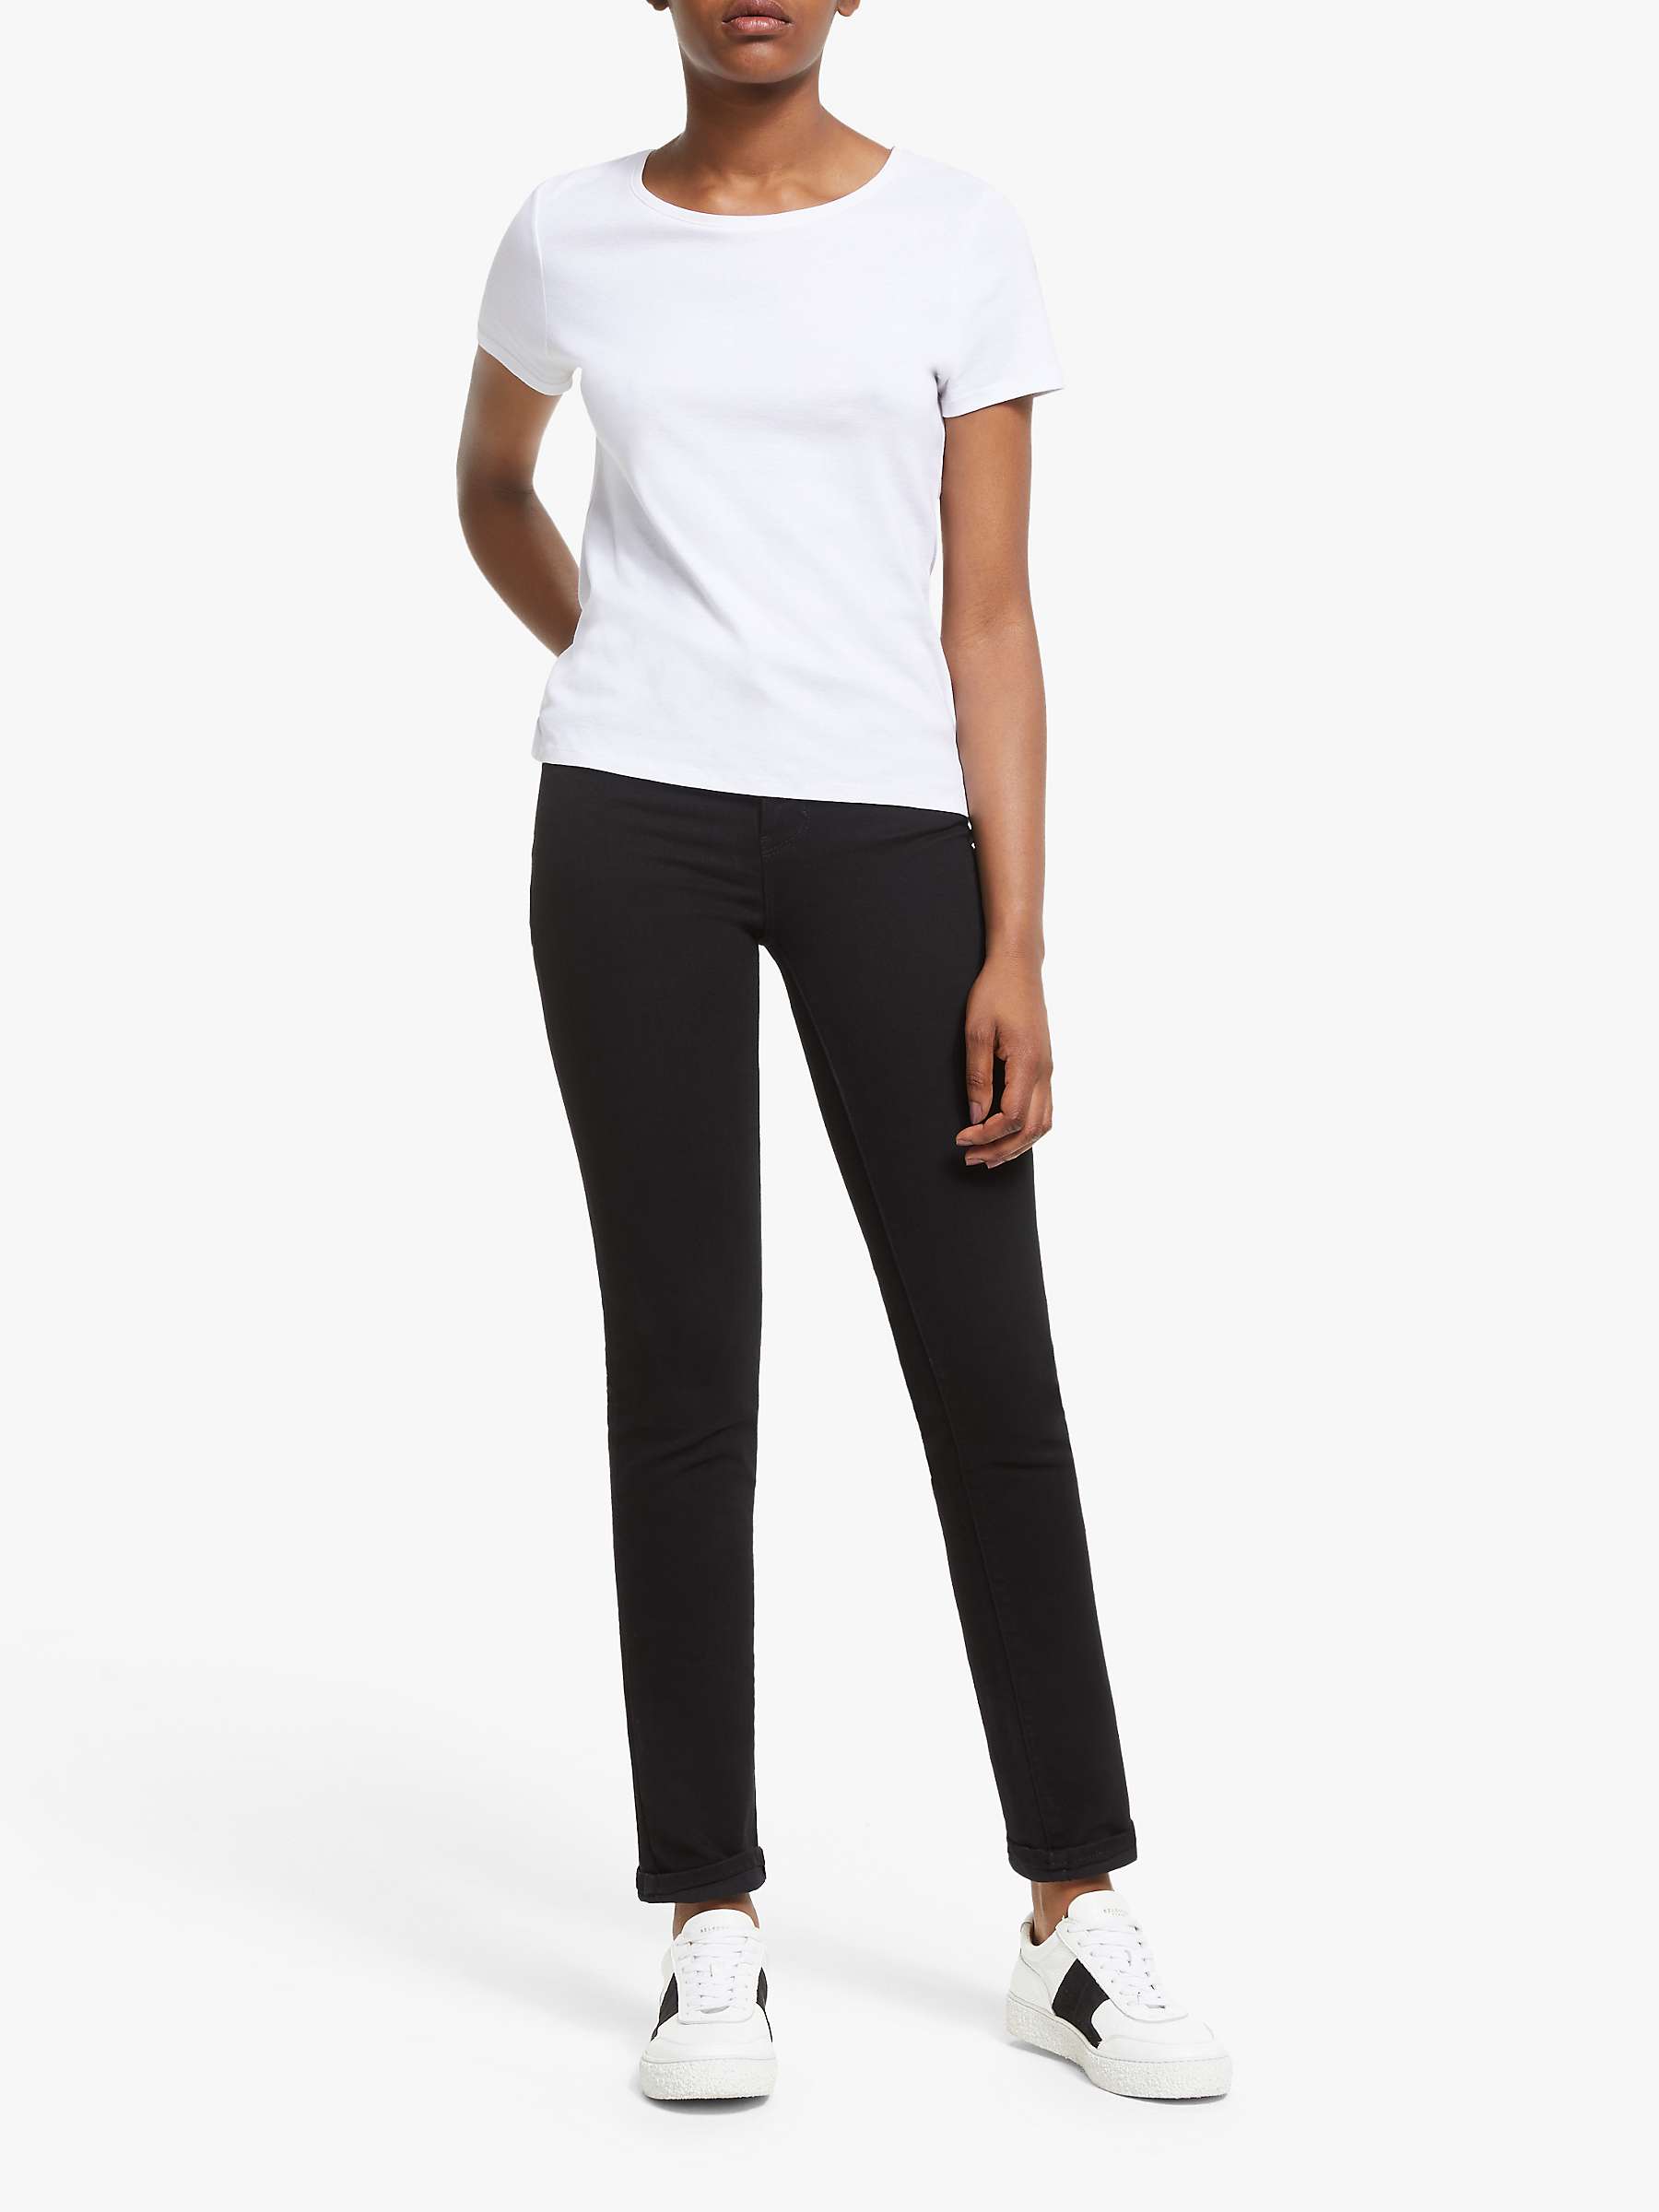 Buy Levi's 724 High Rise Straight Jeans, Black Sheep Online at johnlewis.com